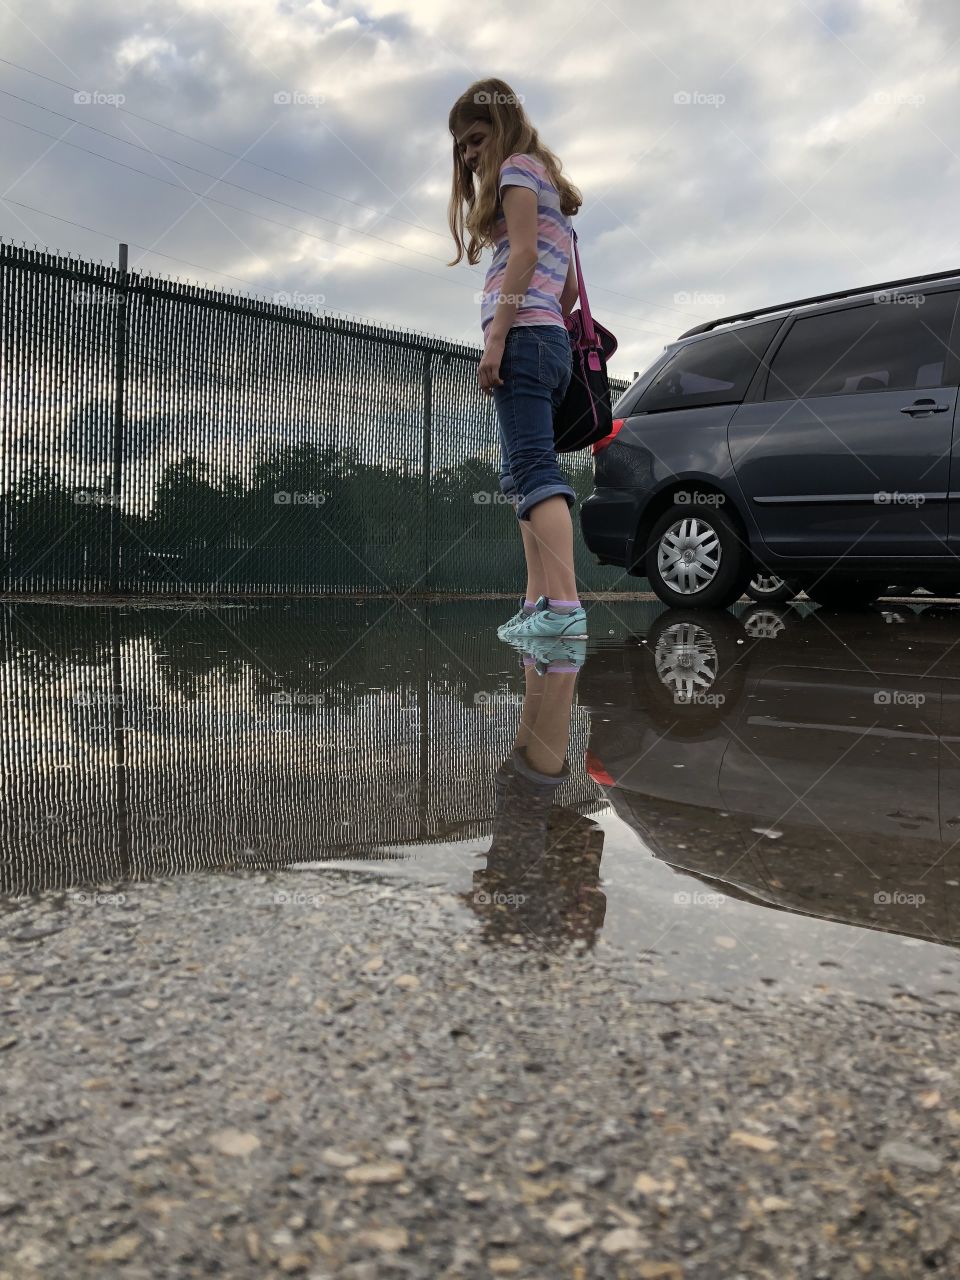 Girl stands in puddle with urban fence and minivan in background